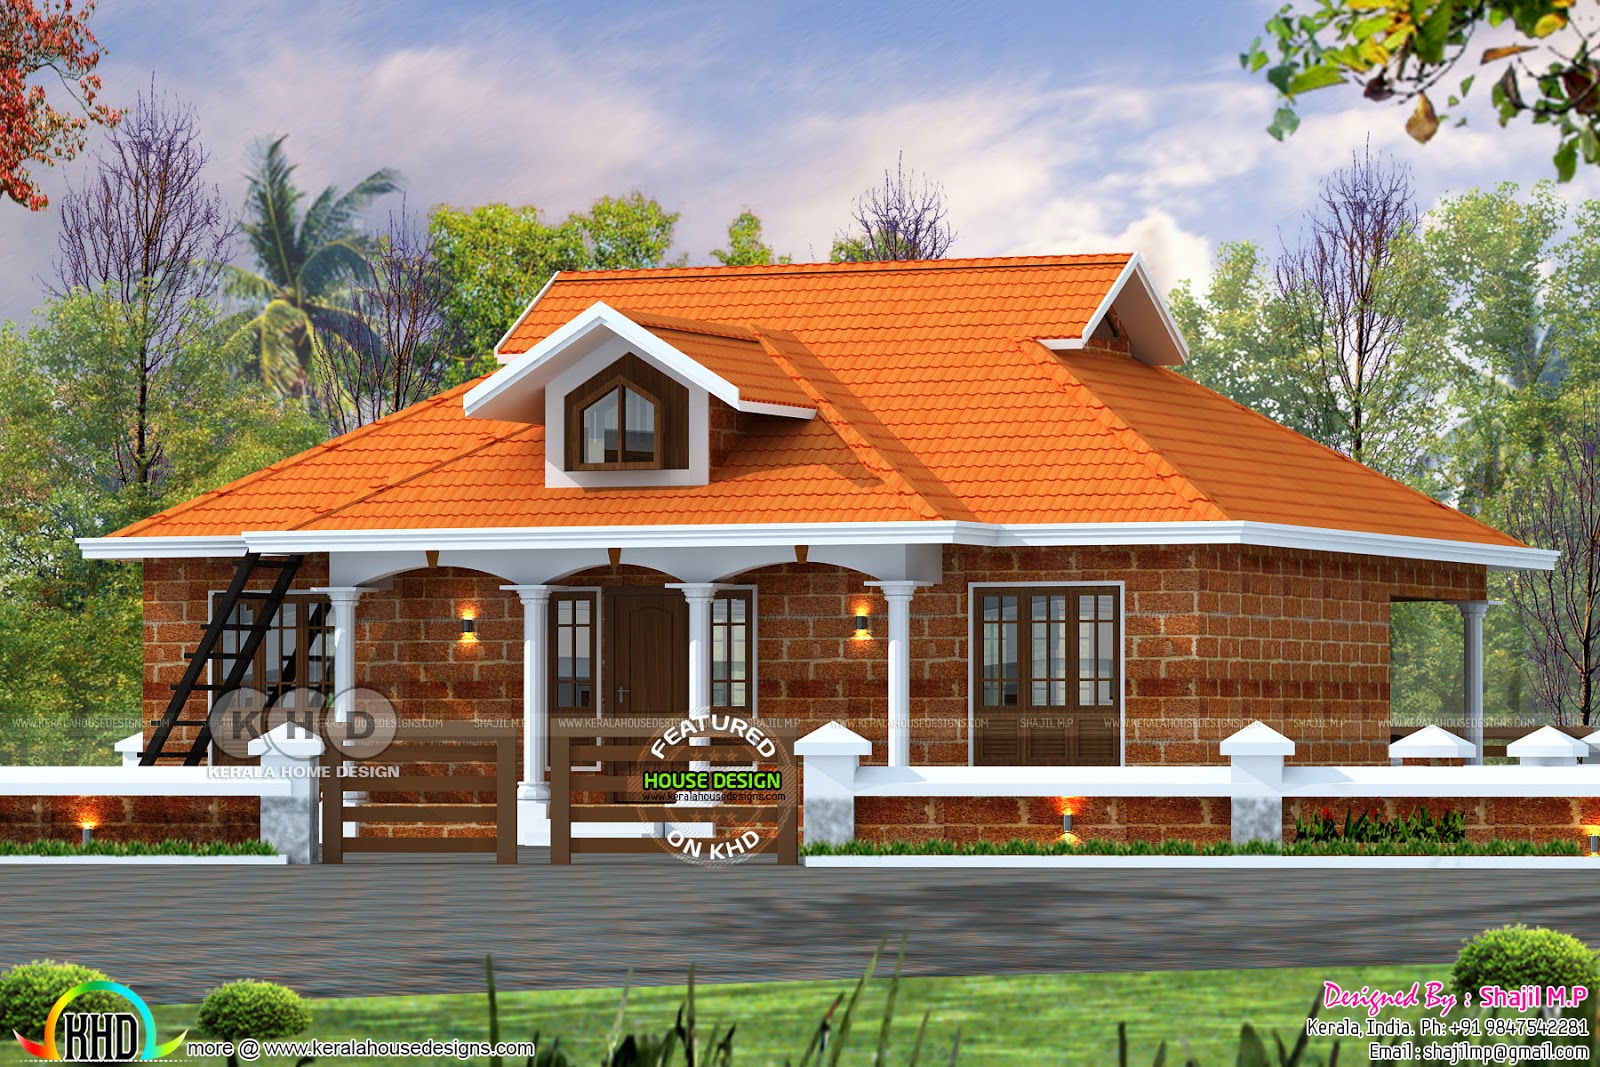  1200  Square  feet  3 bedroom house  architecture plan  